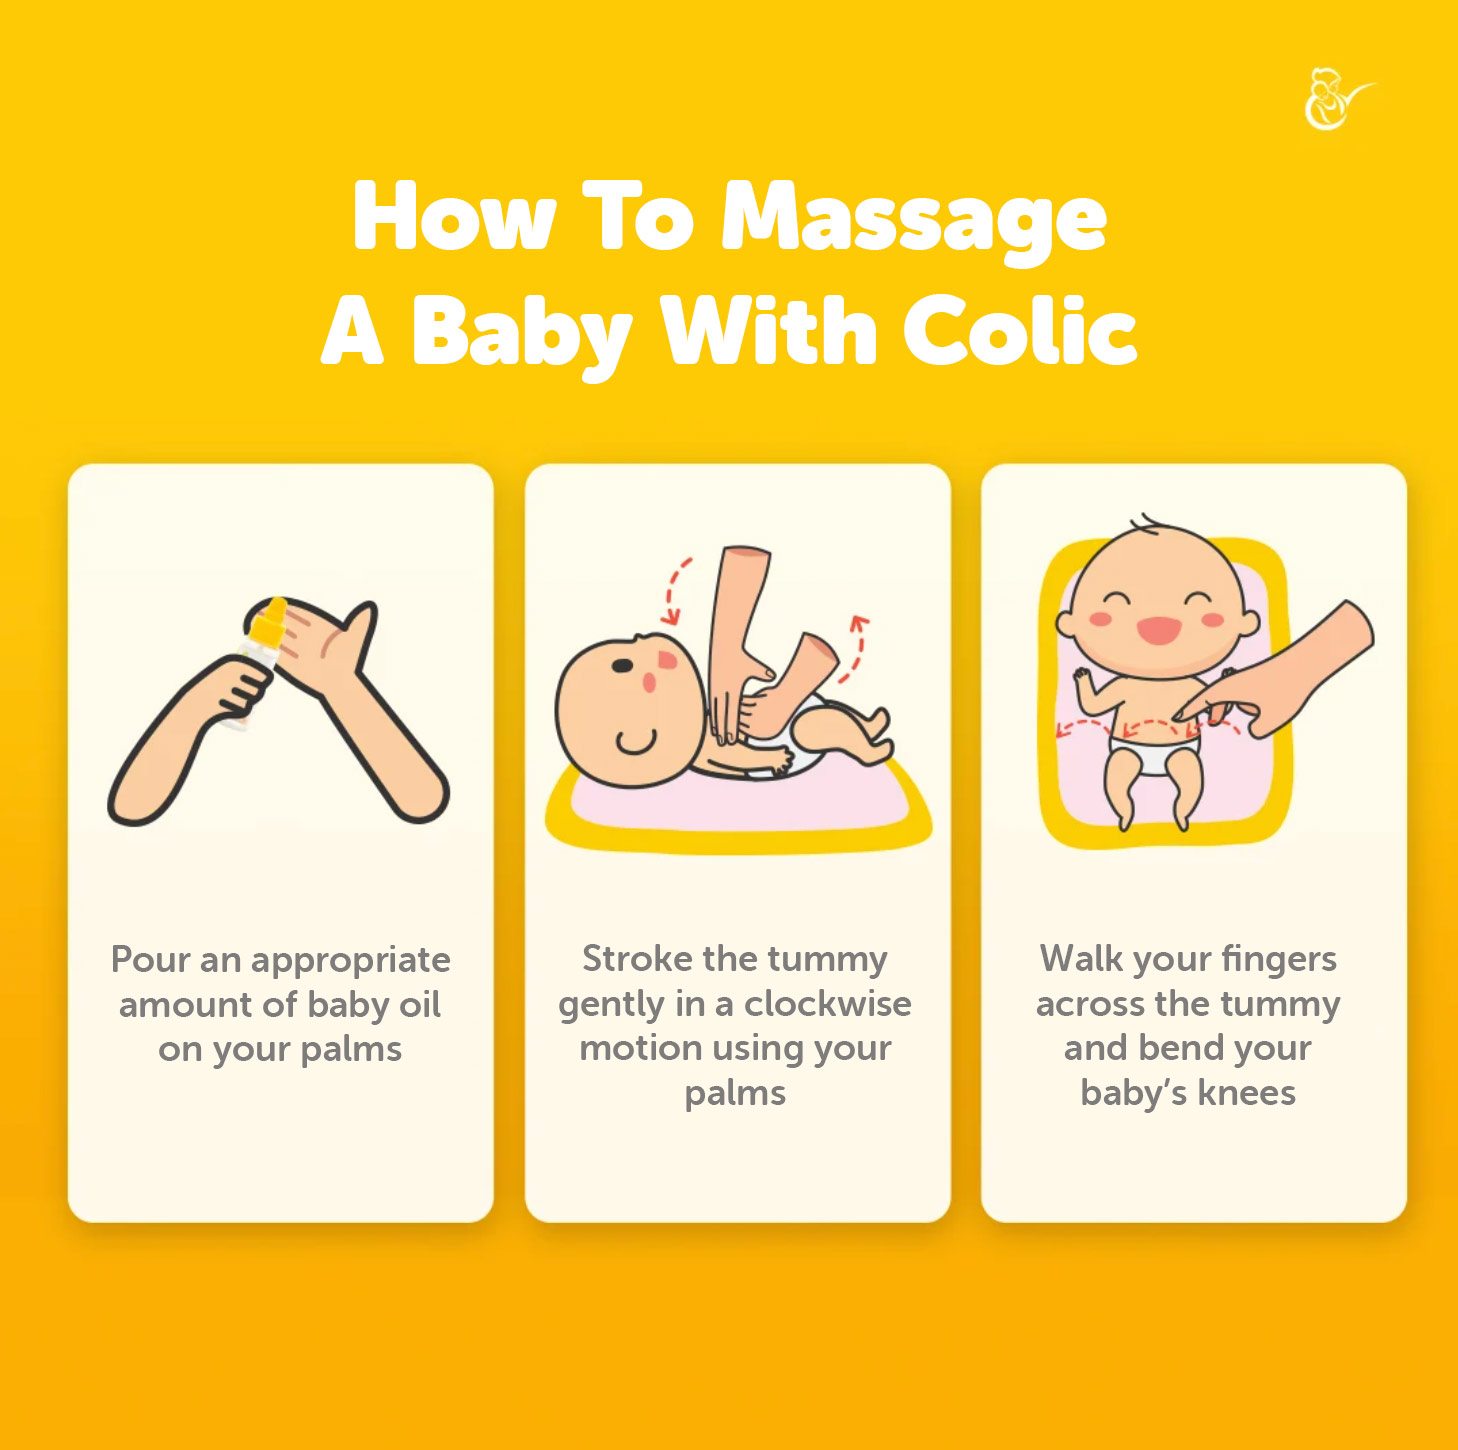 How-to-massage-a-baby-with-colic